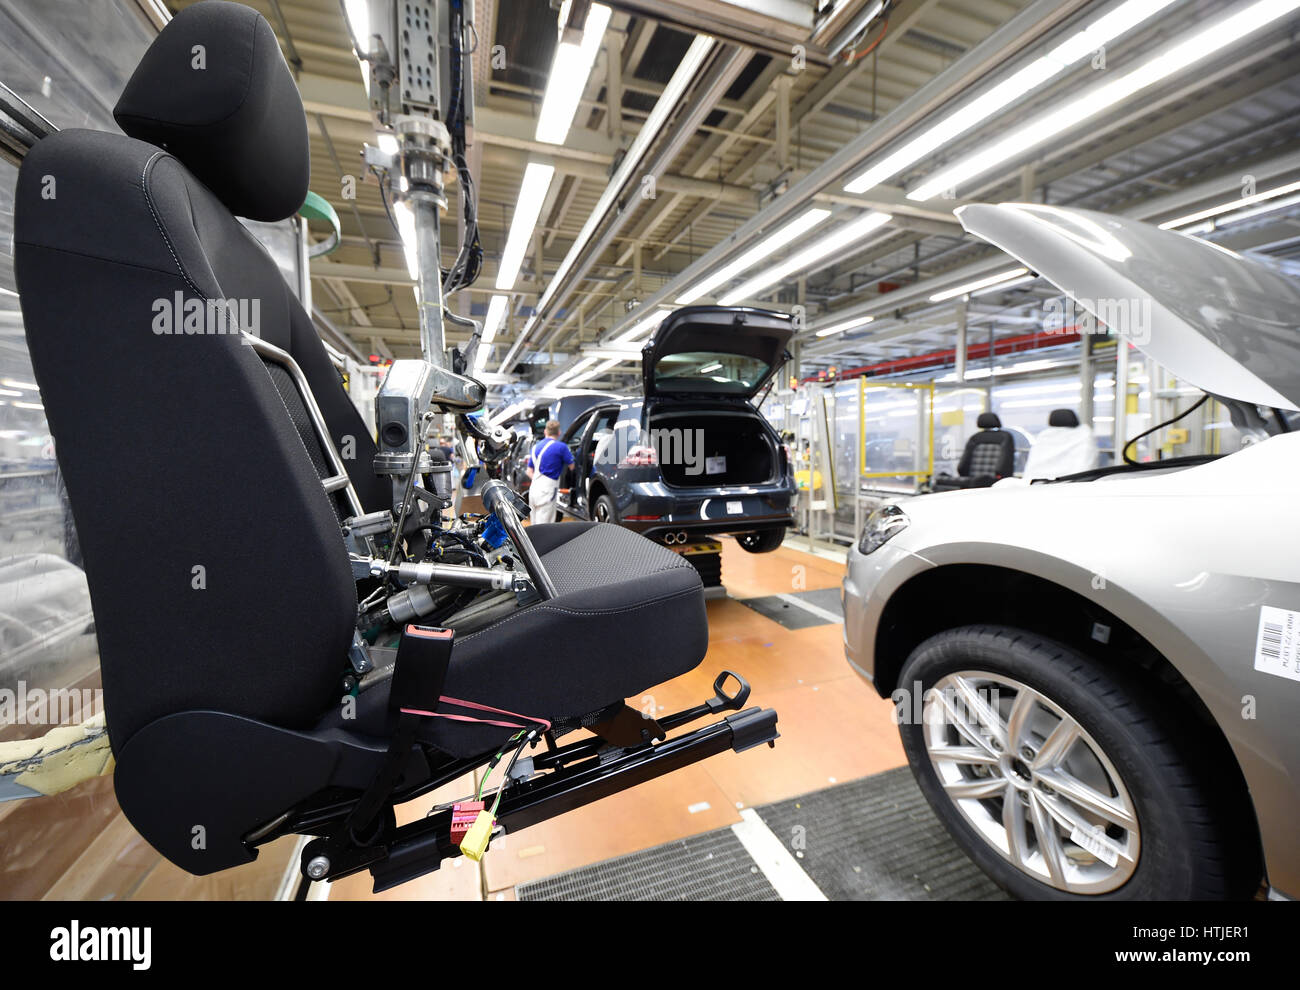 Volkswagen Golf cars are seen in a production line at the companies headquarter in Wolfsburg, March 9, 2017. VW Golf, Golfs in der Produktionslinie im Stock Photo